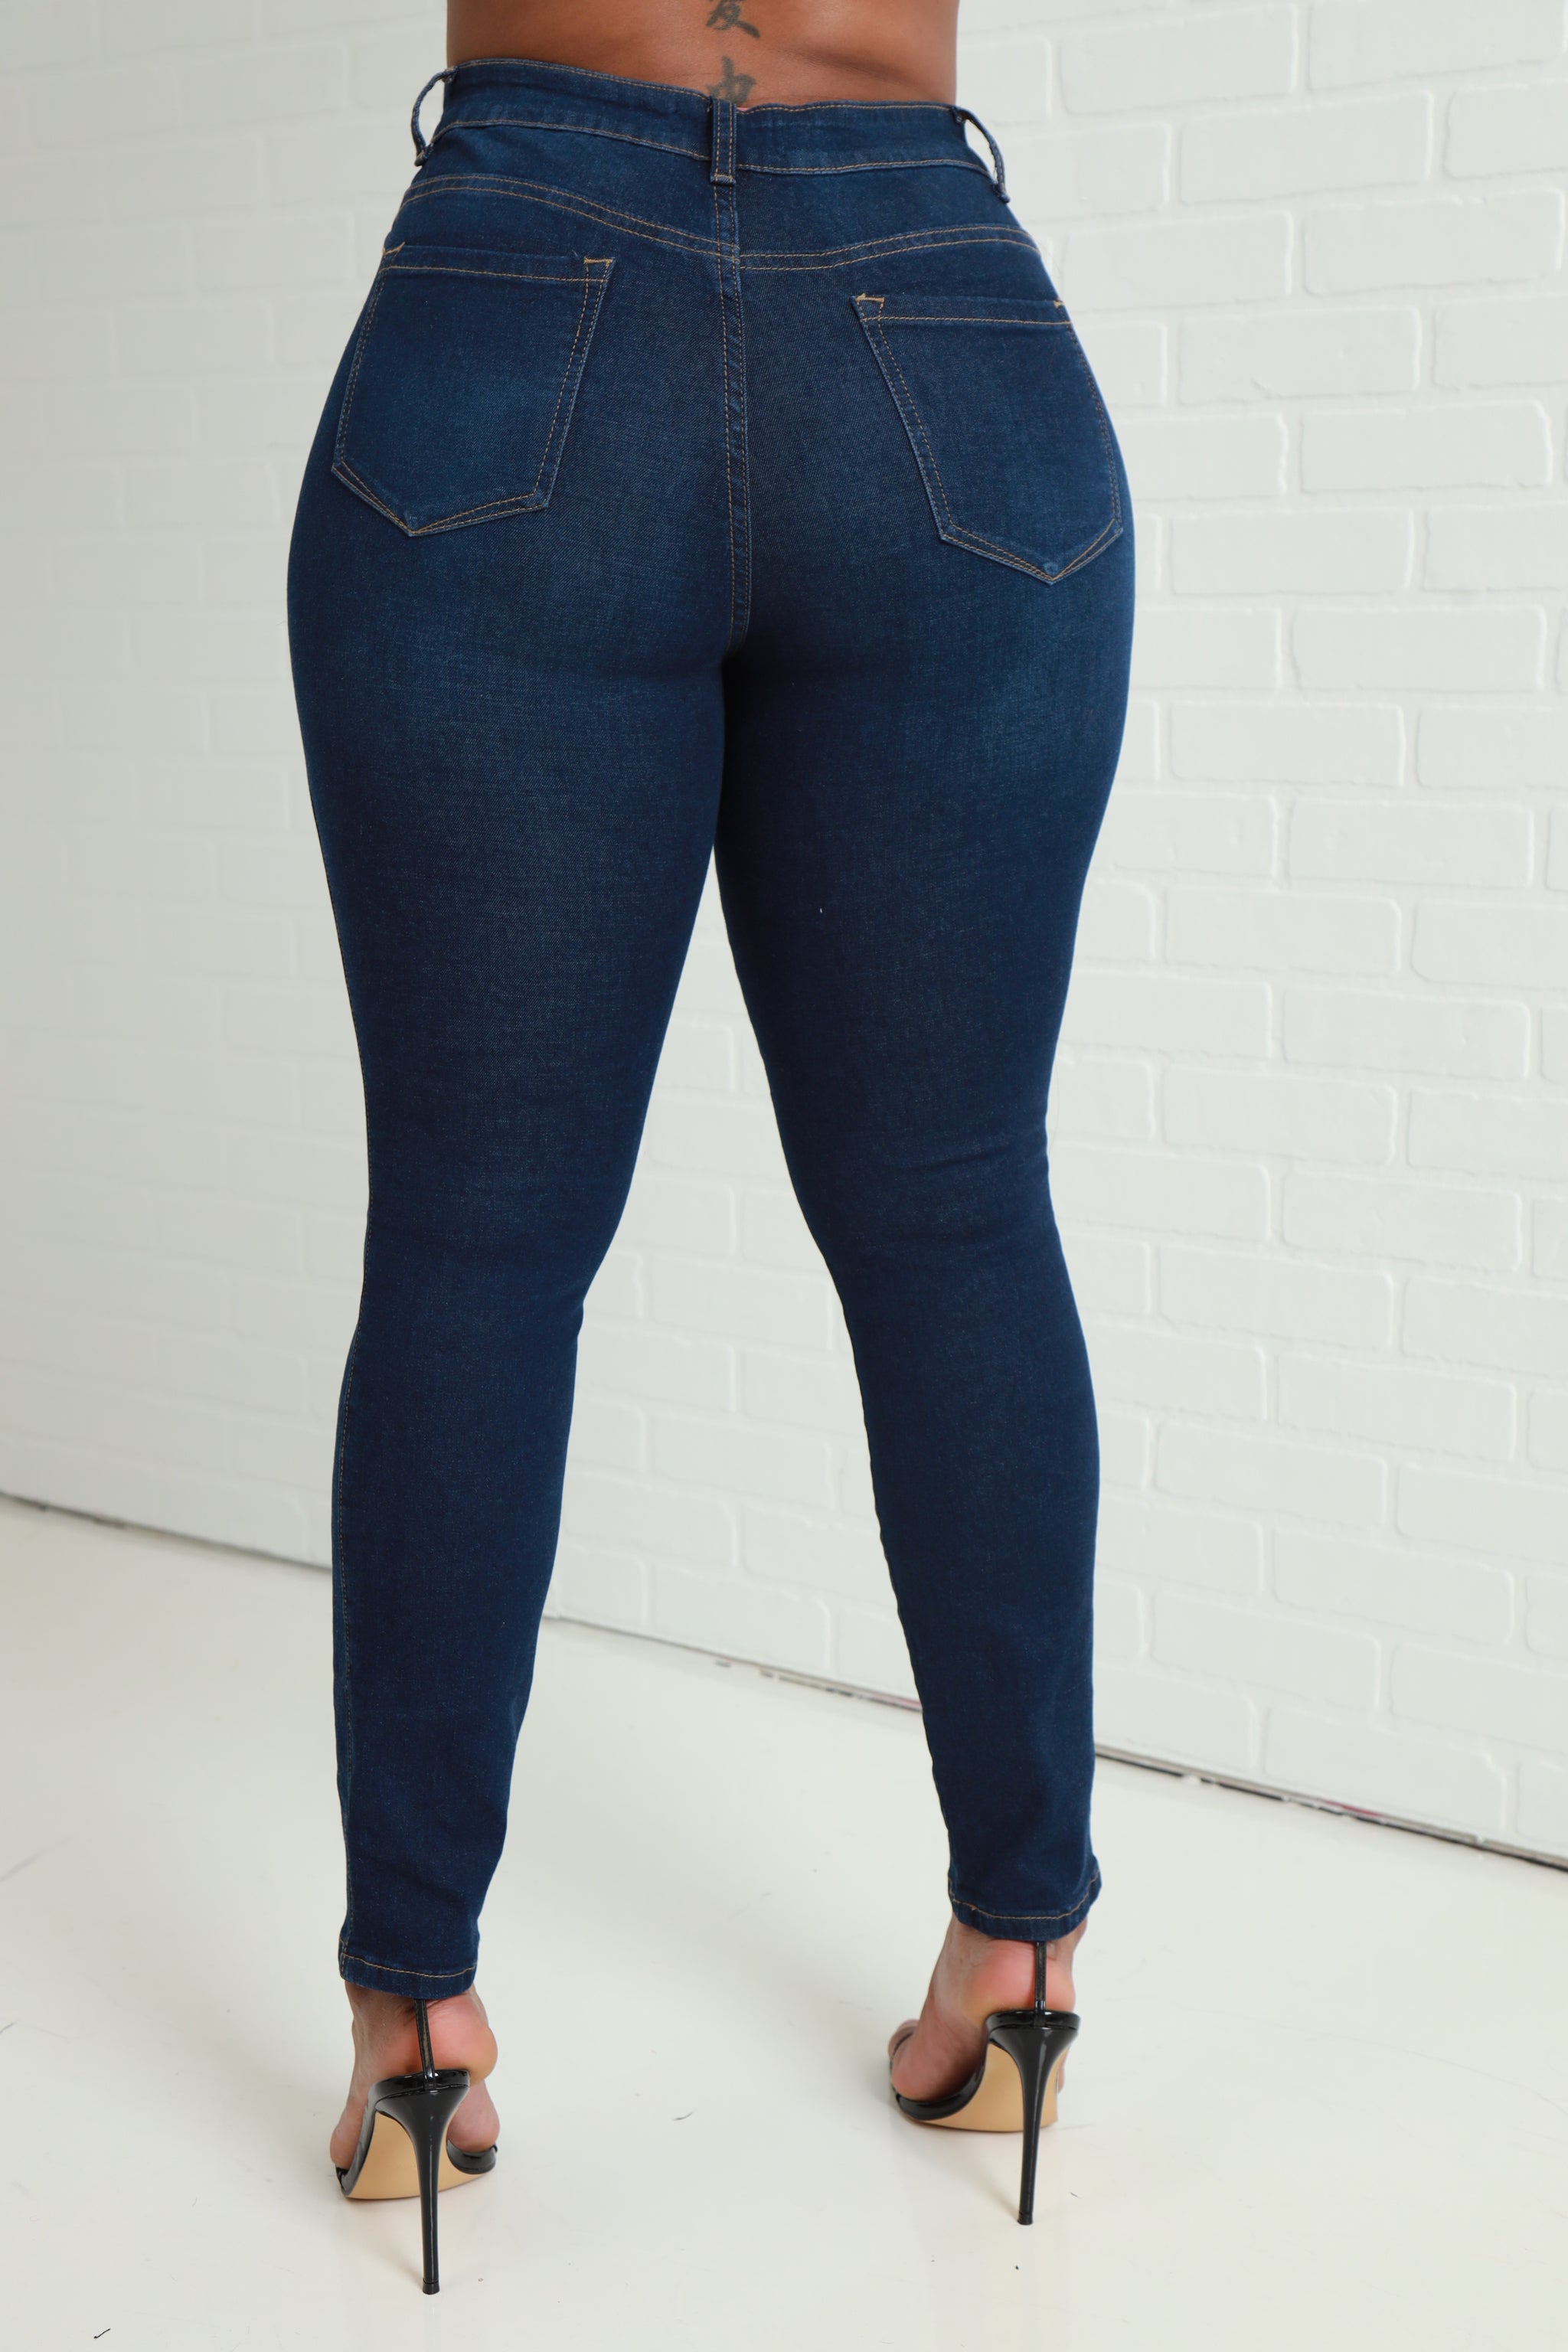 Been Awhile Hourglass High Rise Stretchy Jeans - Dark Wash | Swank A Posh